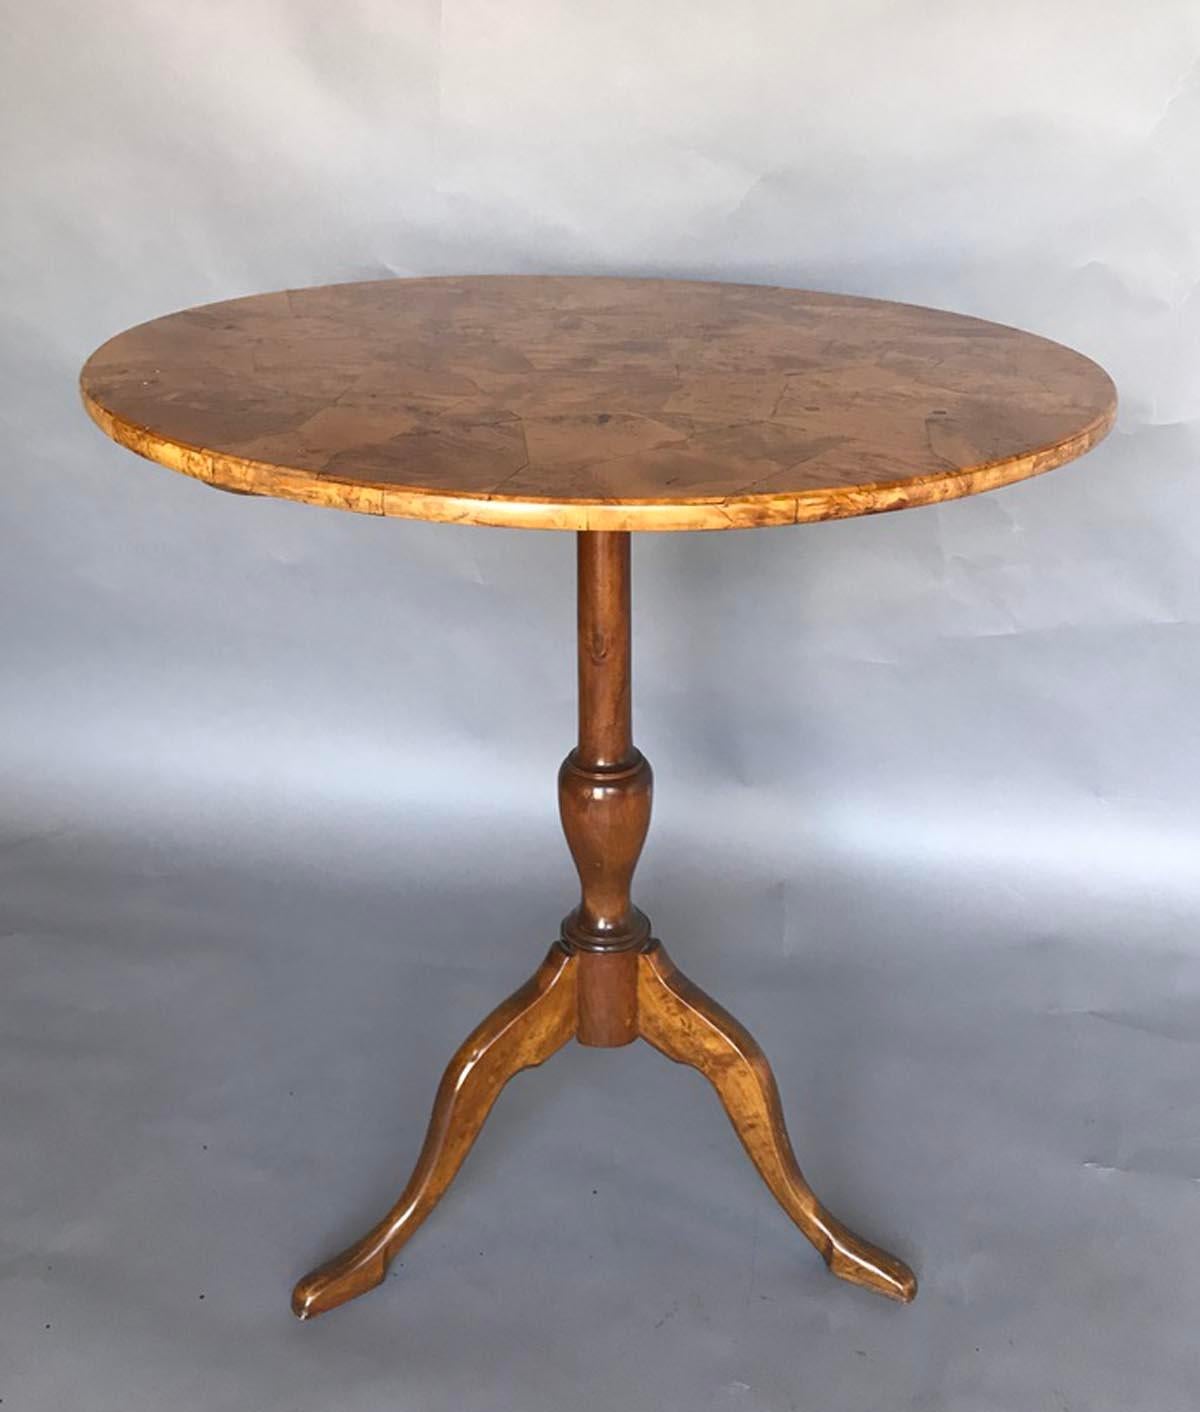 Turn of the 19th to 20th century French provincial tilt top table. Patchwork vibrant curly, flame birch top is a standout on a slender tripod pedestal base. In very good condition! Elegant and classic.